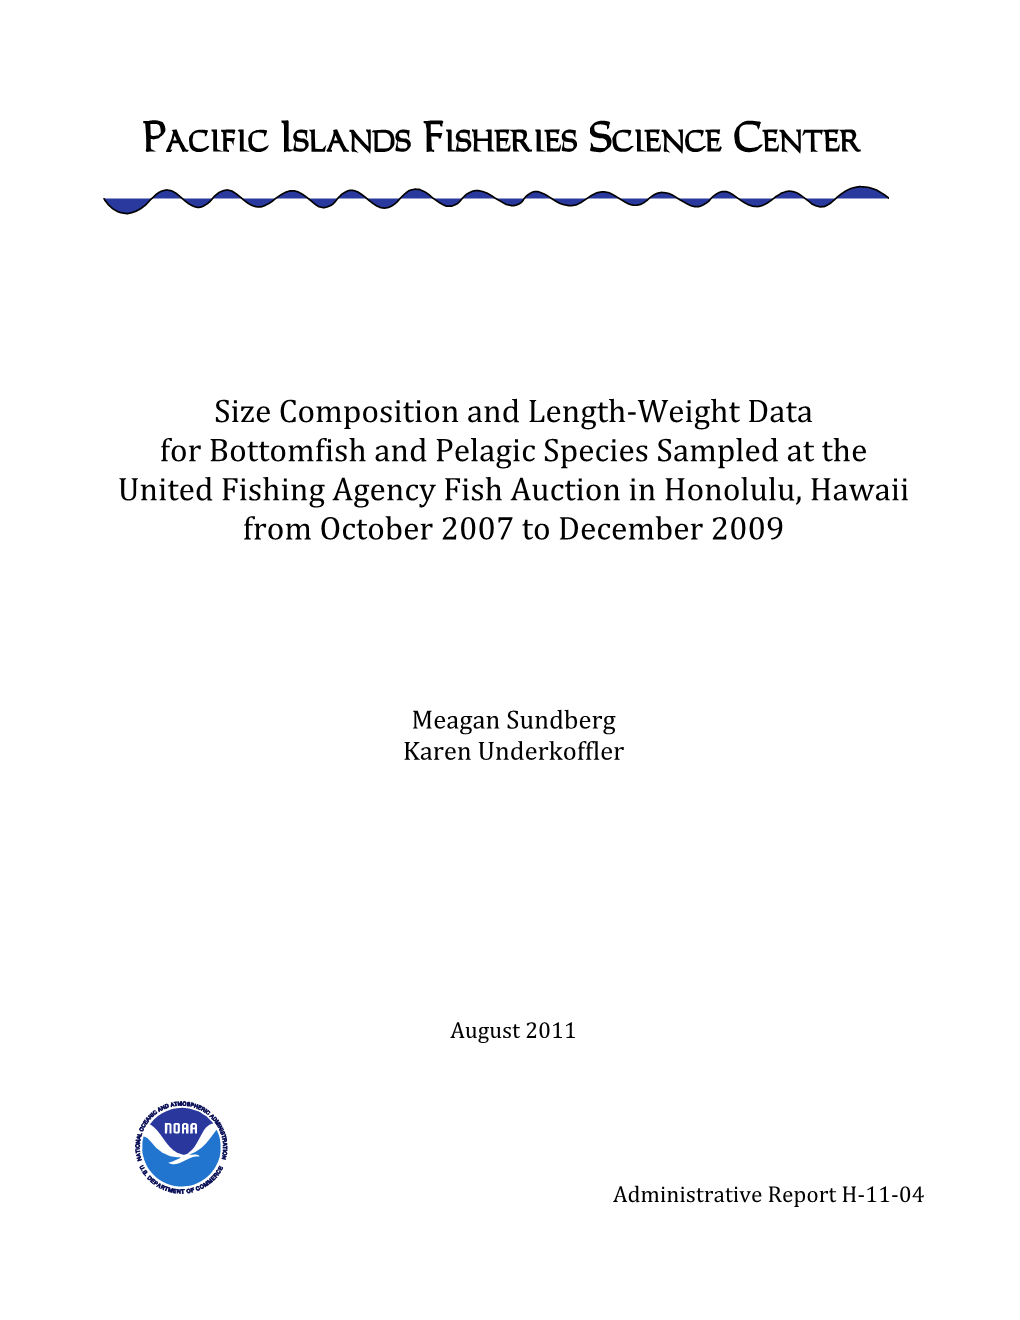 Size Composition and Length‐Weight Data for Bottomfish and Pelagic